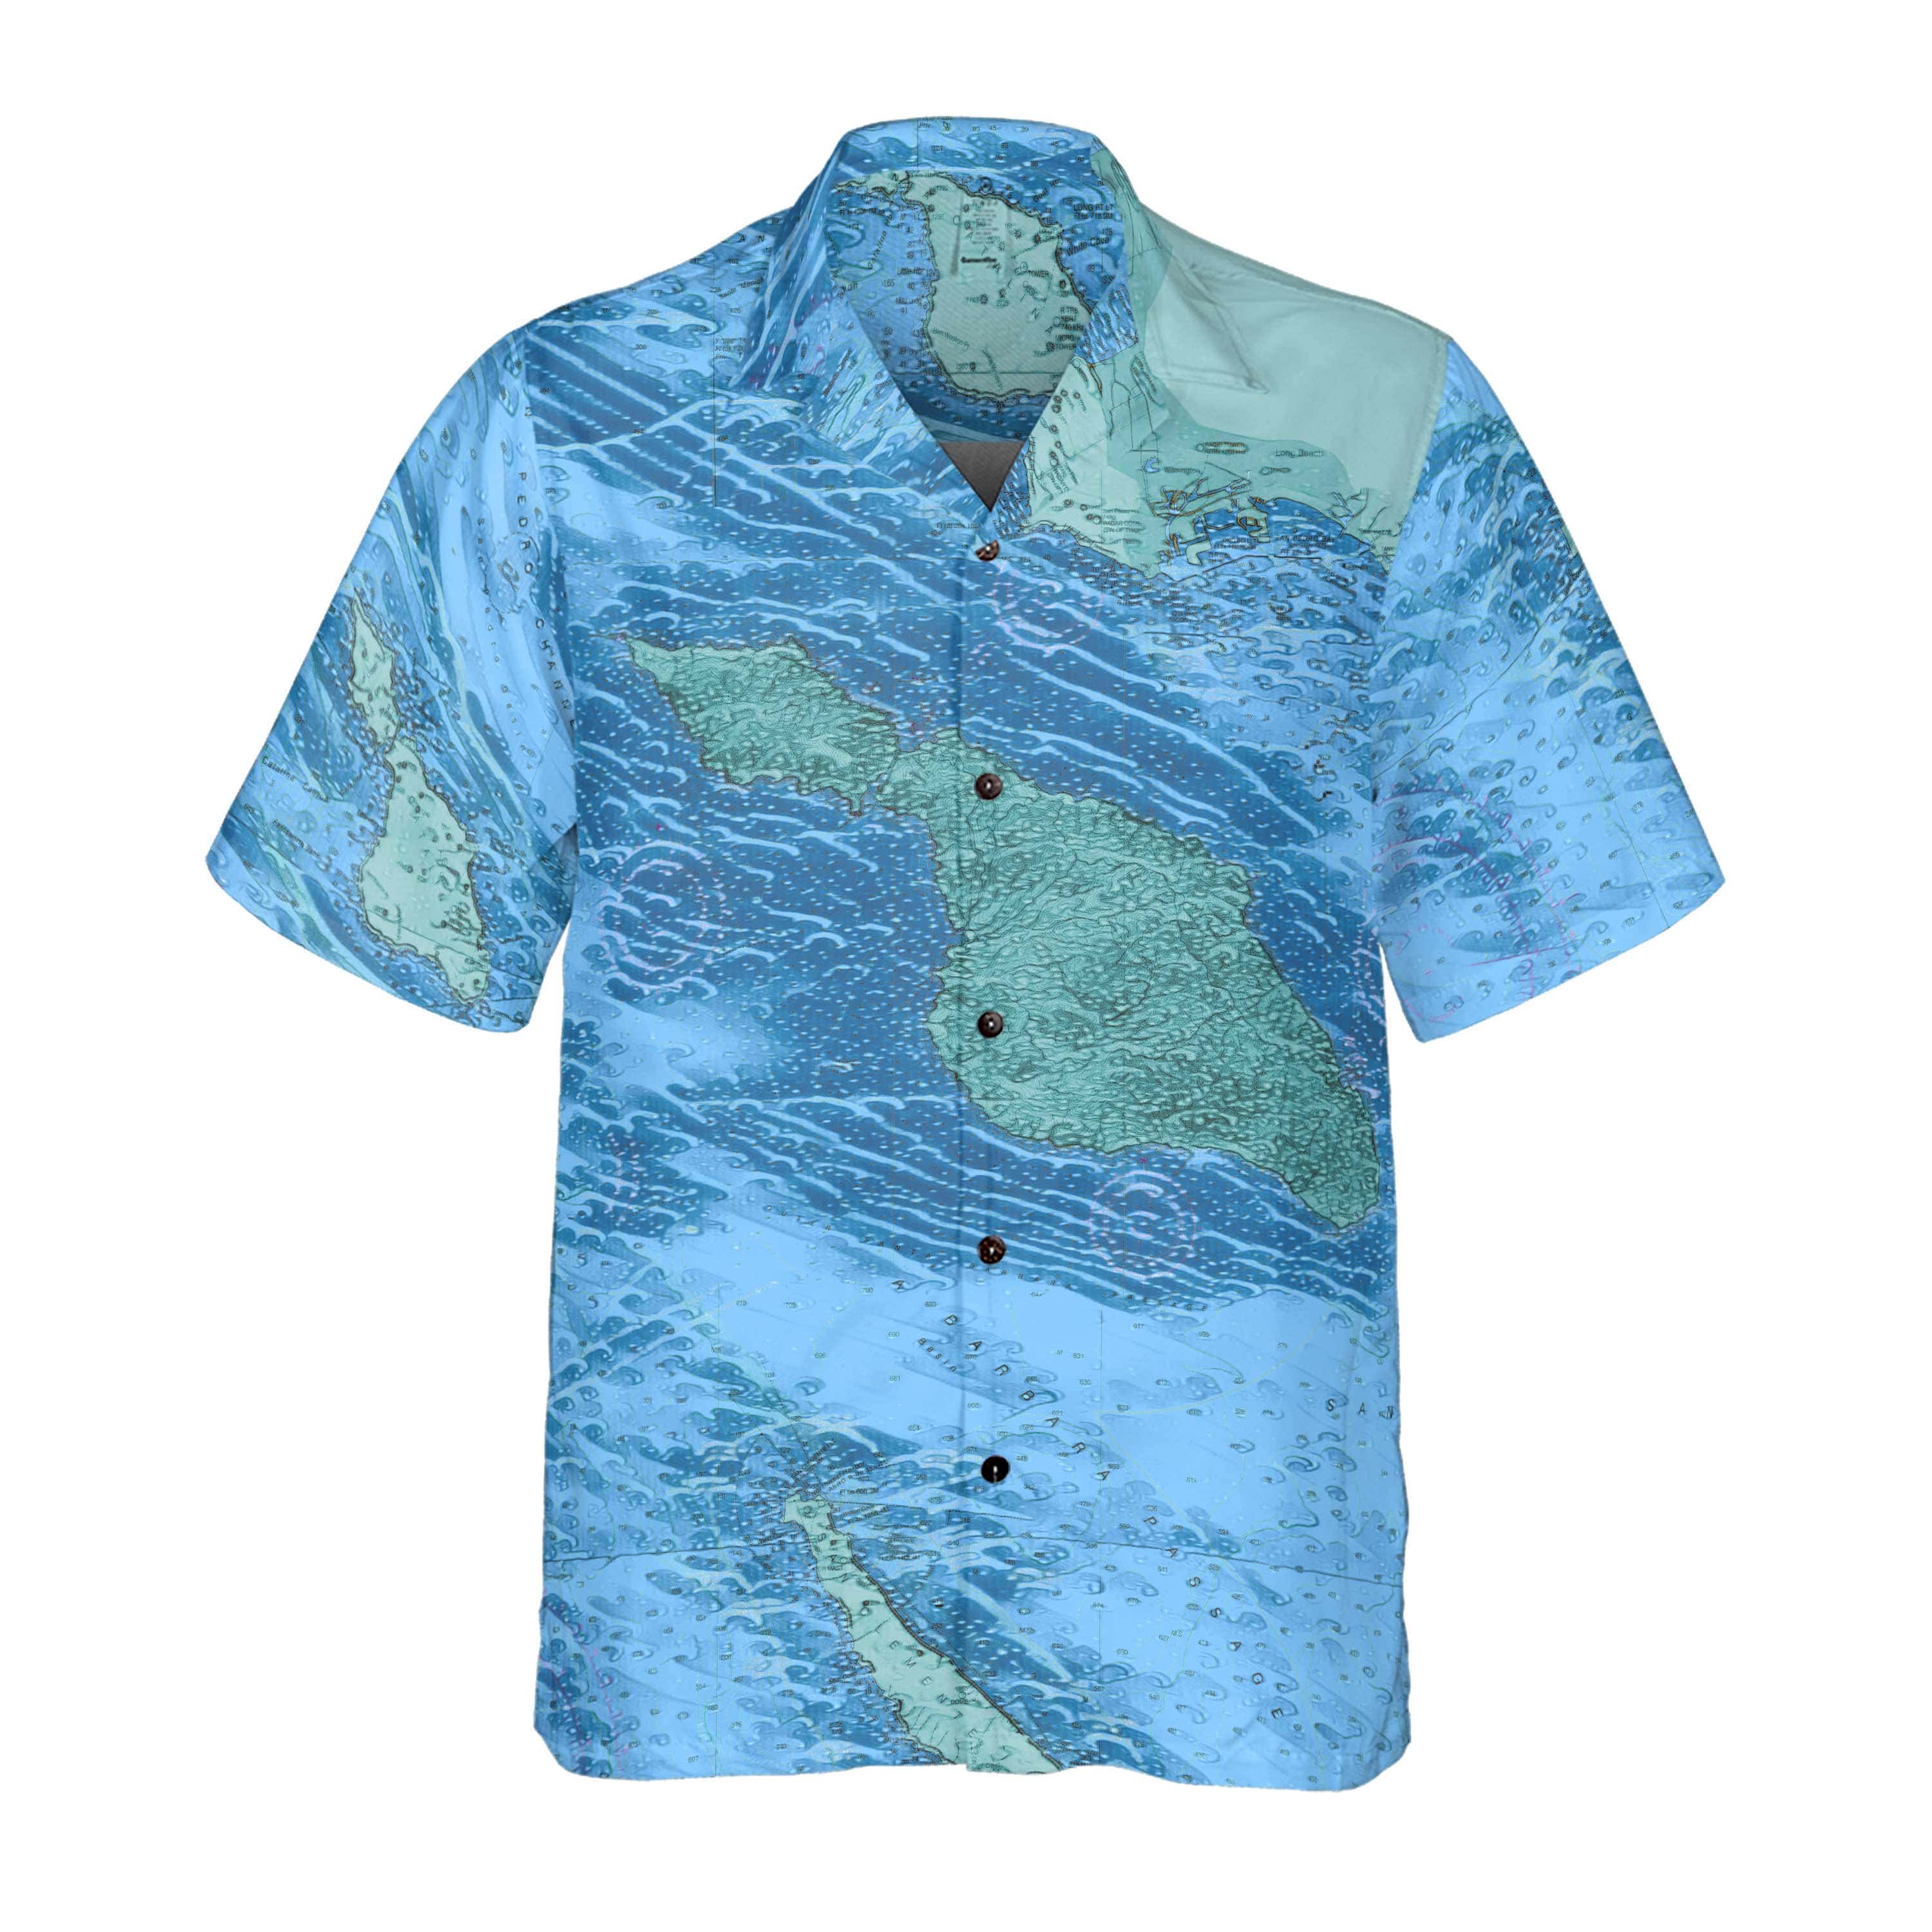 The Catalina Island Surf Coconut Button Camp Shirt